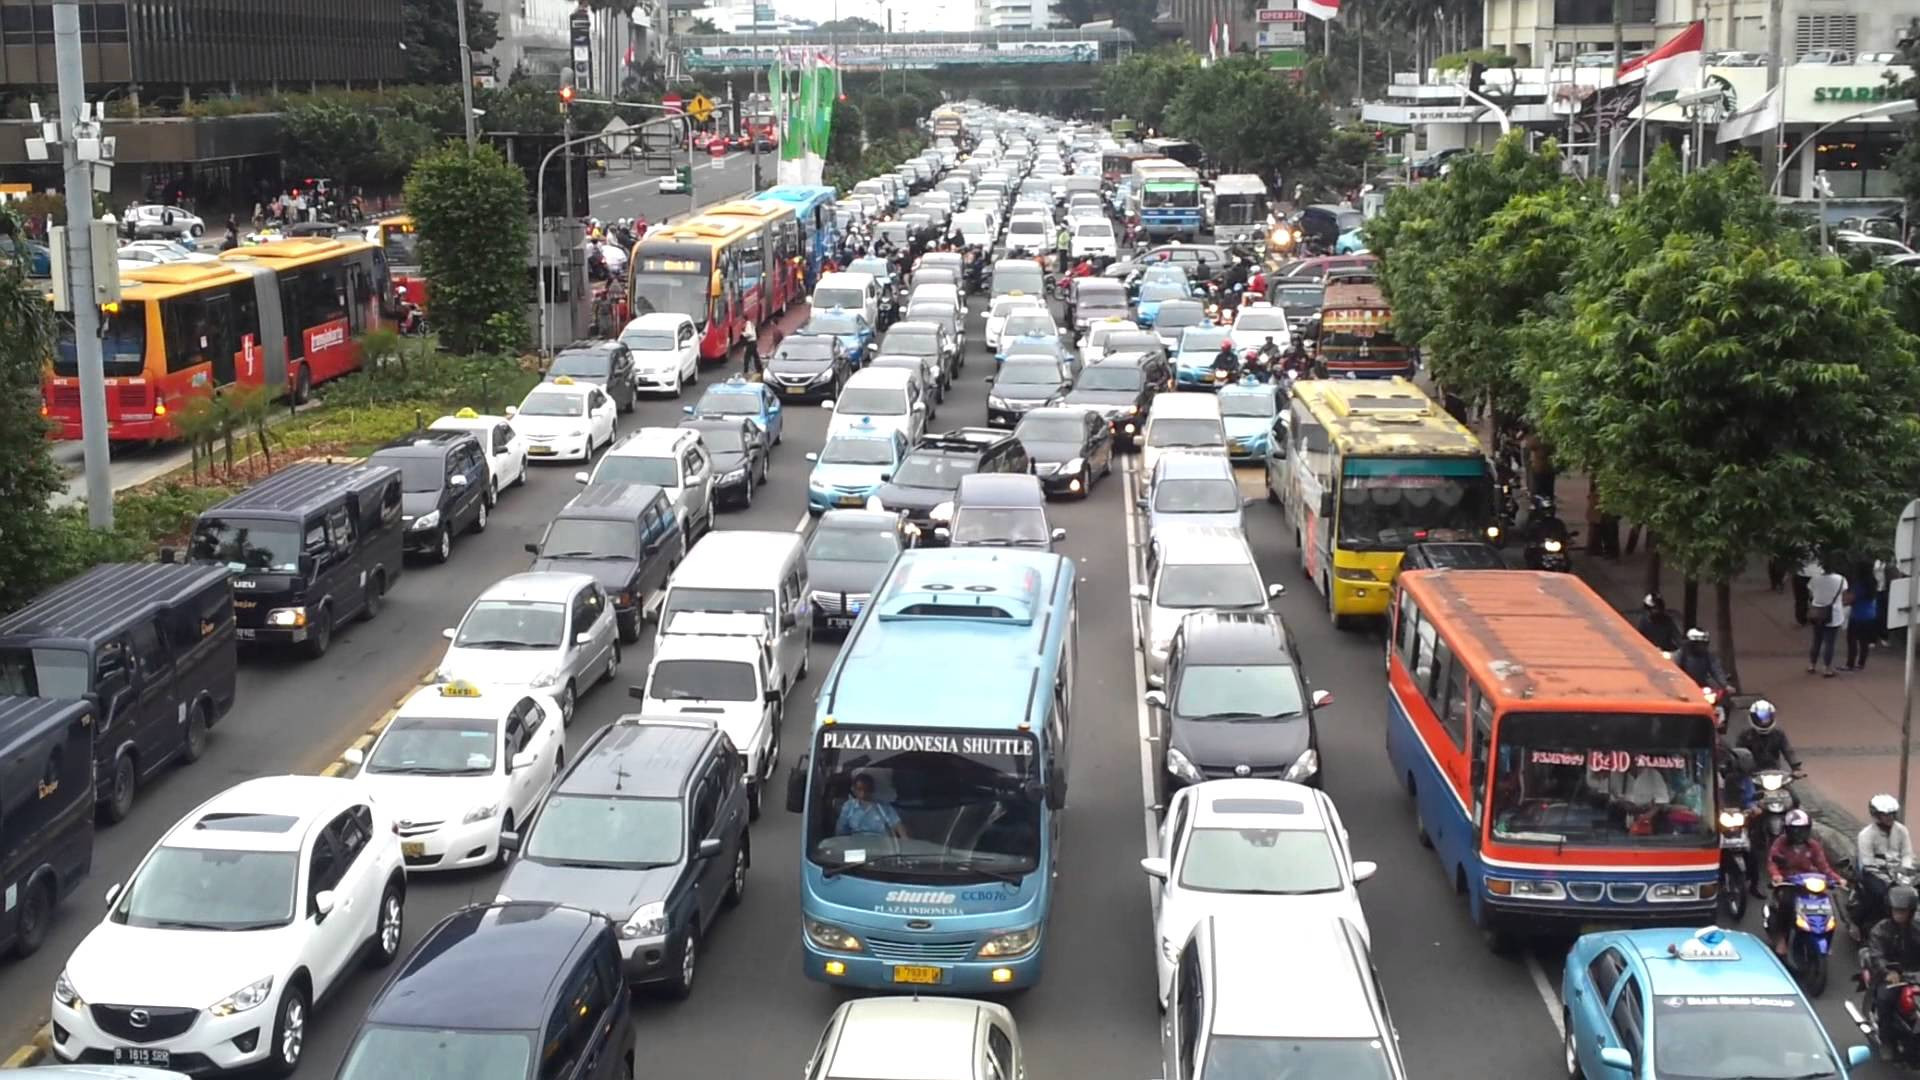 Jakarta is famous for some of the worst traffic jams in the world ©YouTube